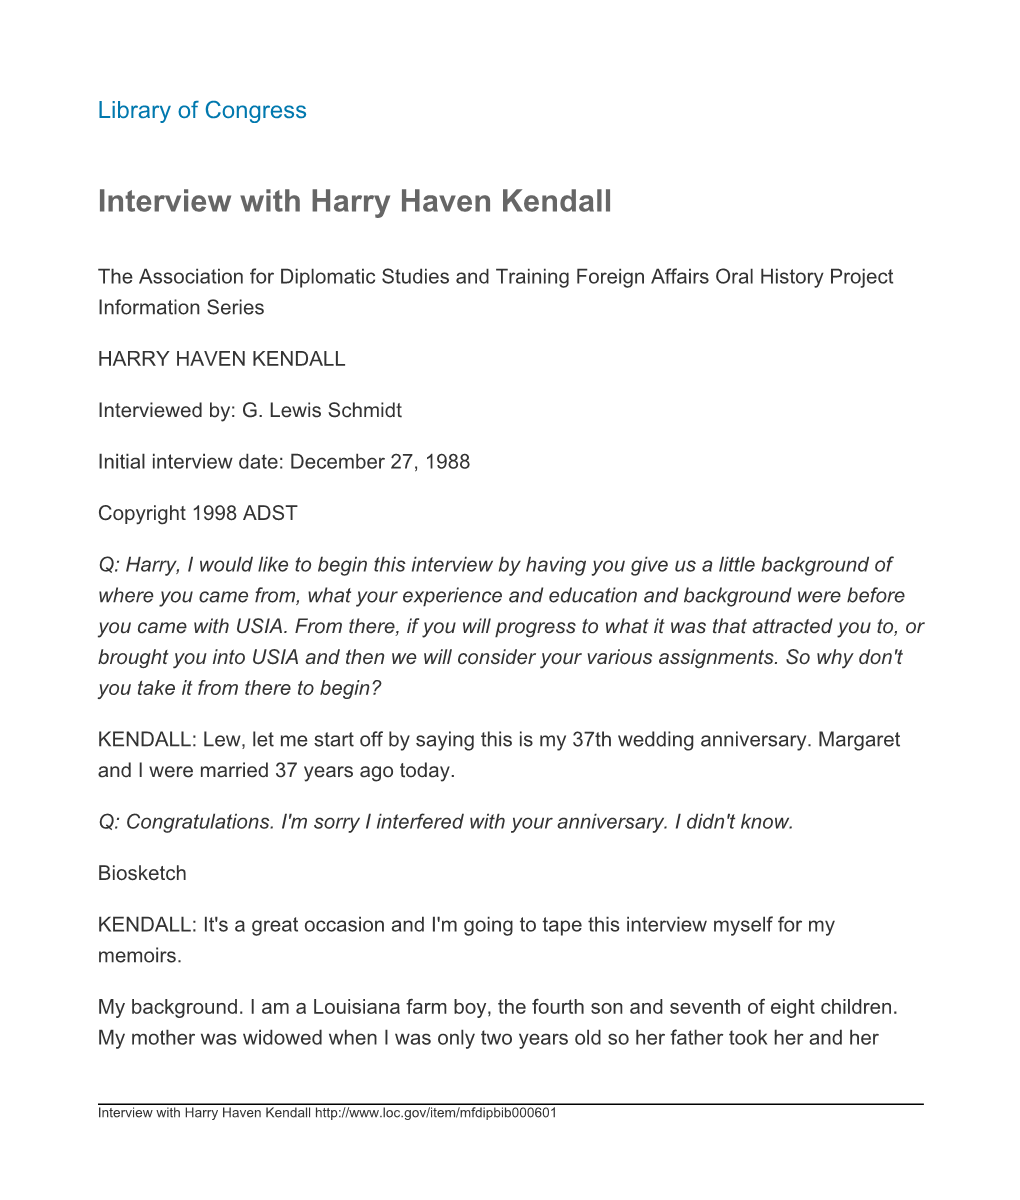 Interview with Harry Haven Kendall